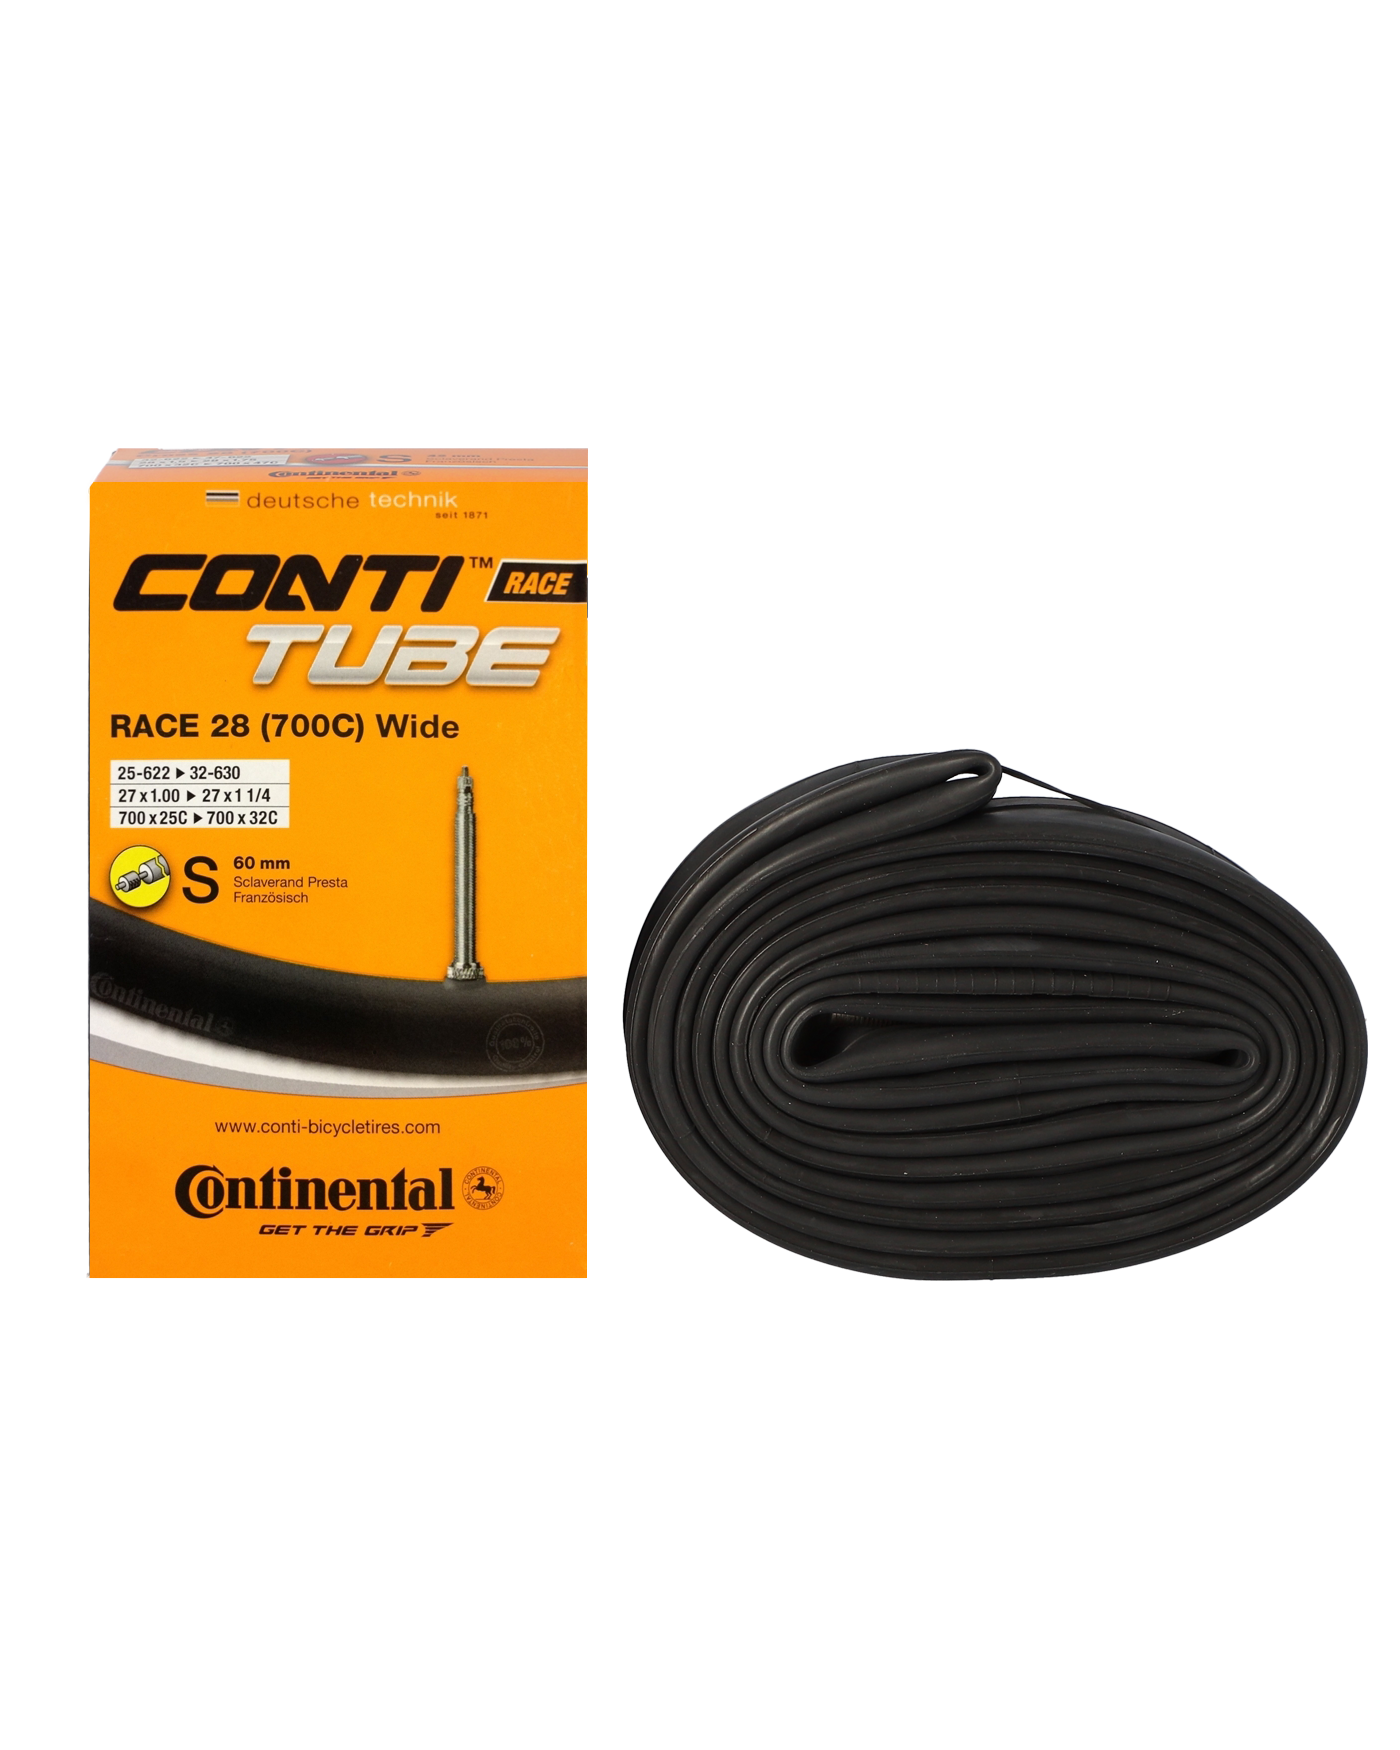 continental bike tyres